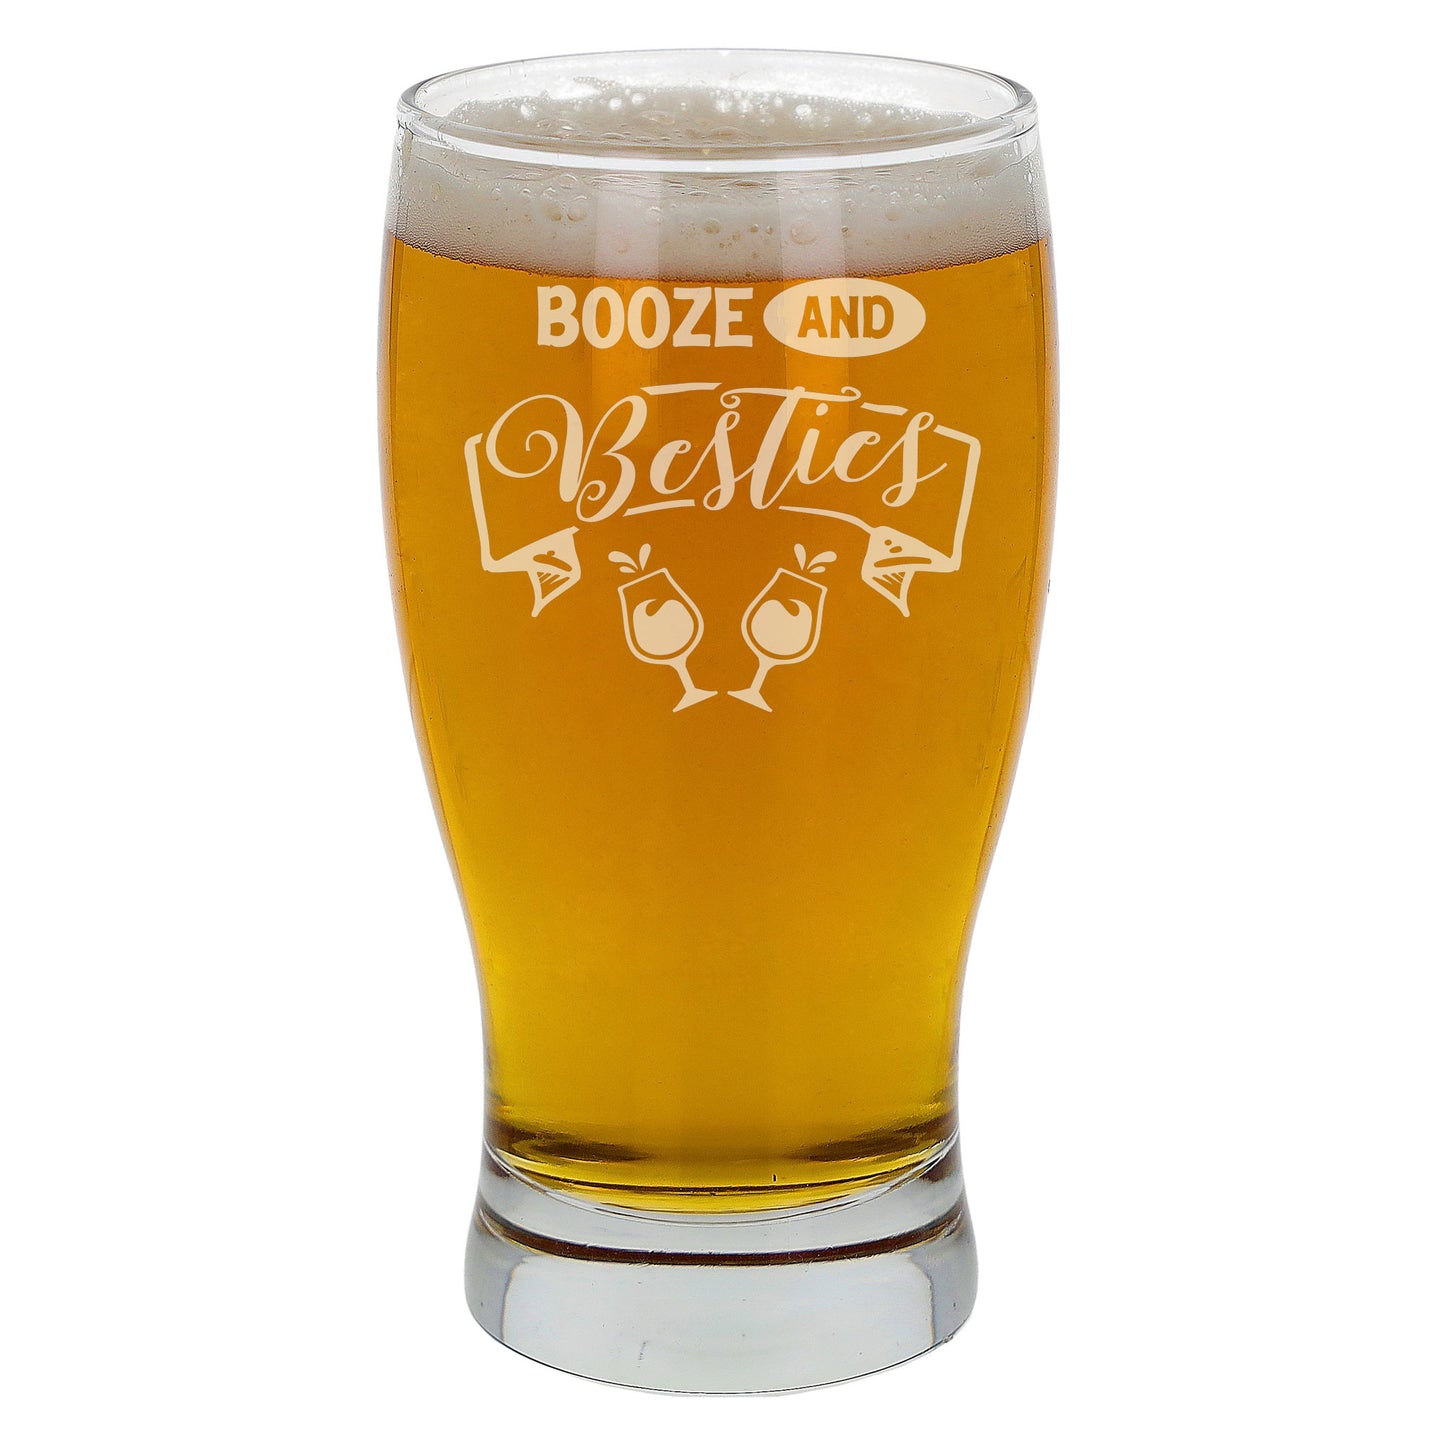 Booze and Besties Engraved Beer Pint Glass and/or Coaster Set  - Always Looking Good -   